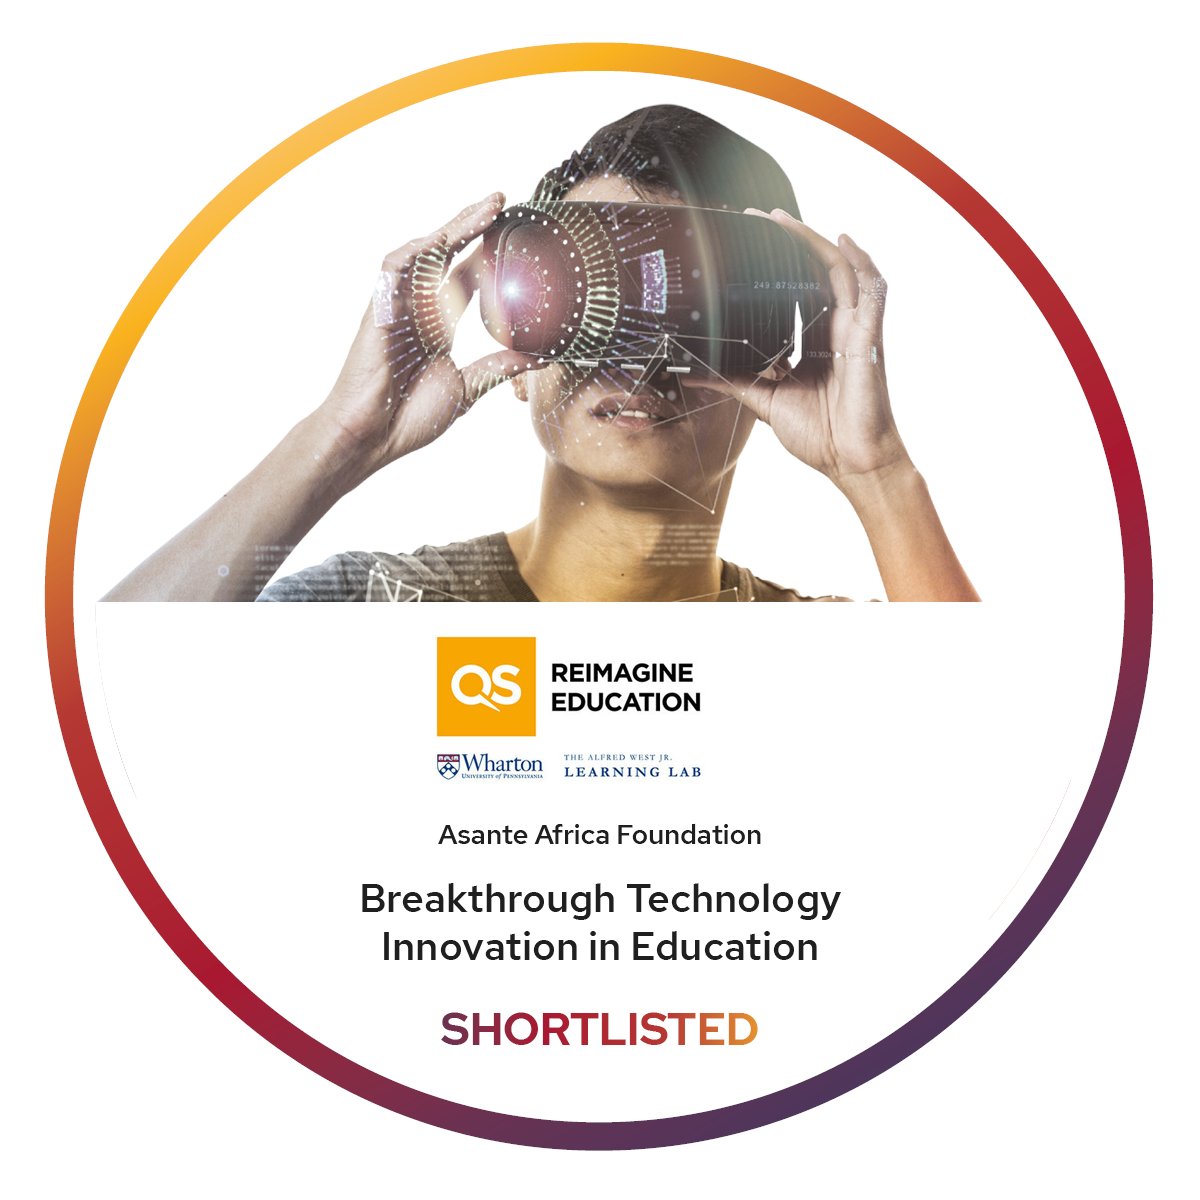 Breaking News! 📣

We are honored and thrilled to announce that we have been shortlisted for the Breakthrough Technology Innovation in Education Award by Reimagine Education through our Accelerated Learning Program! 

#QSReimagine #DigitalTransformation
@QSCorporate